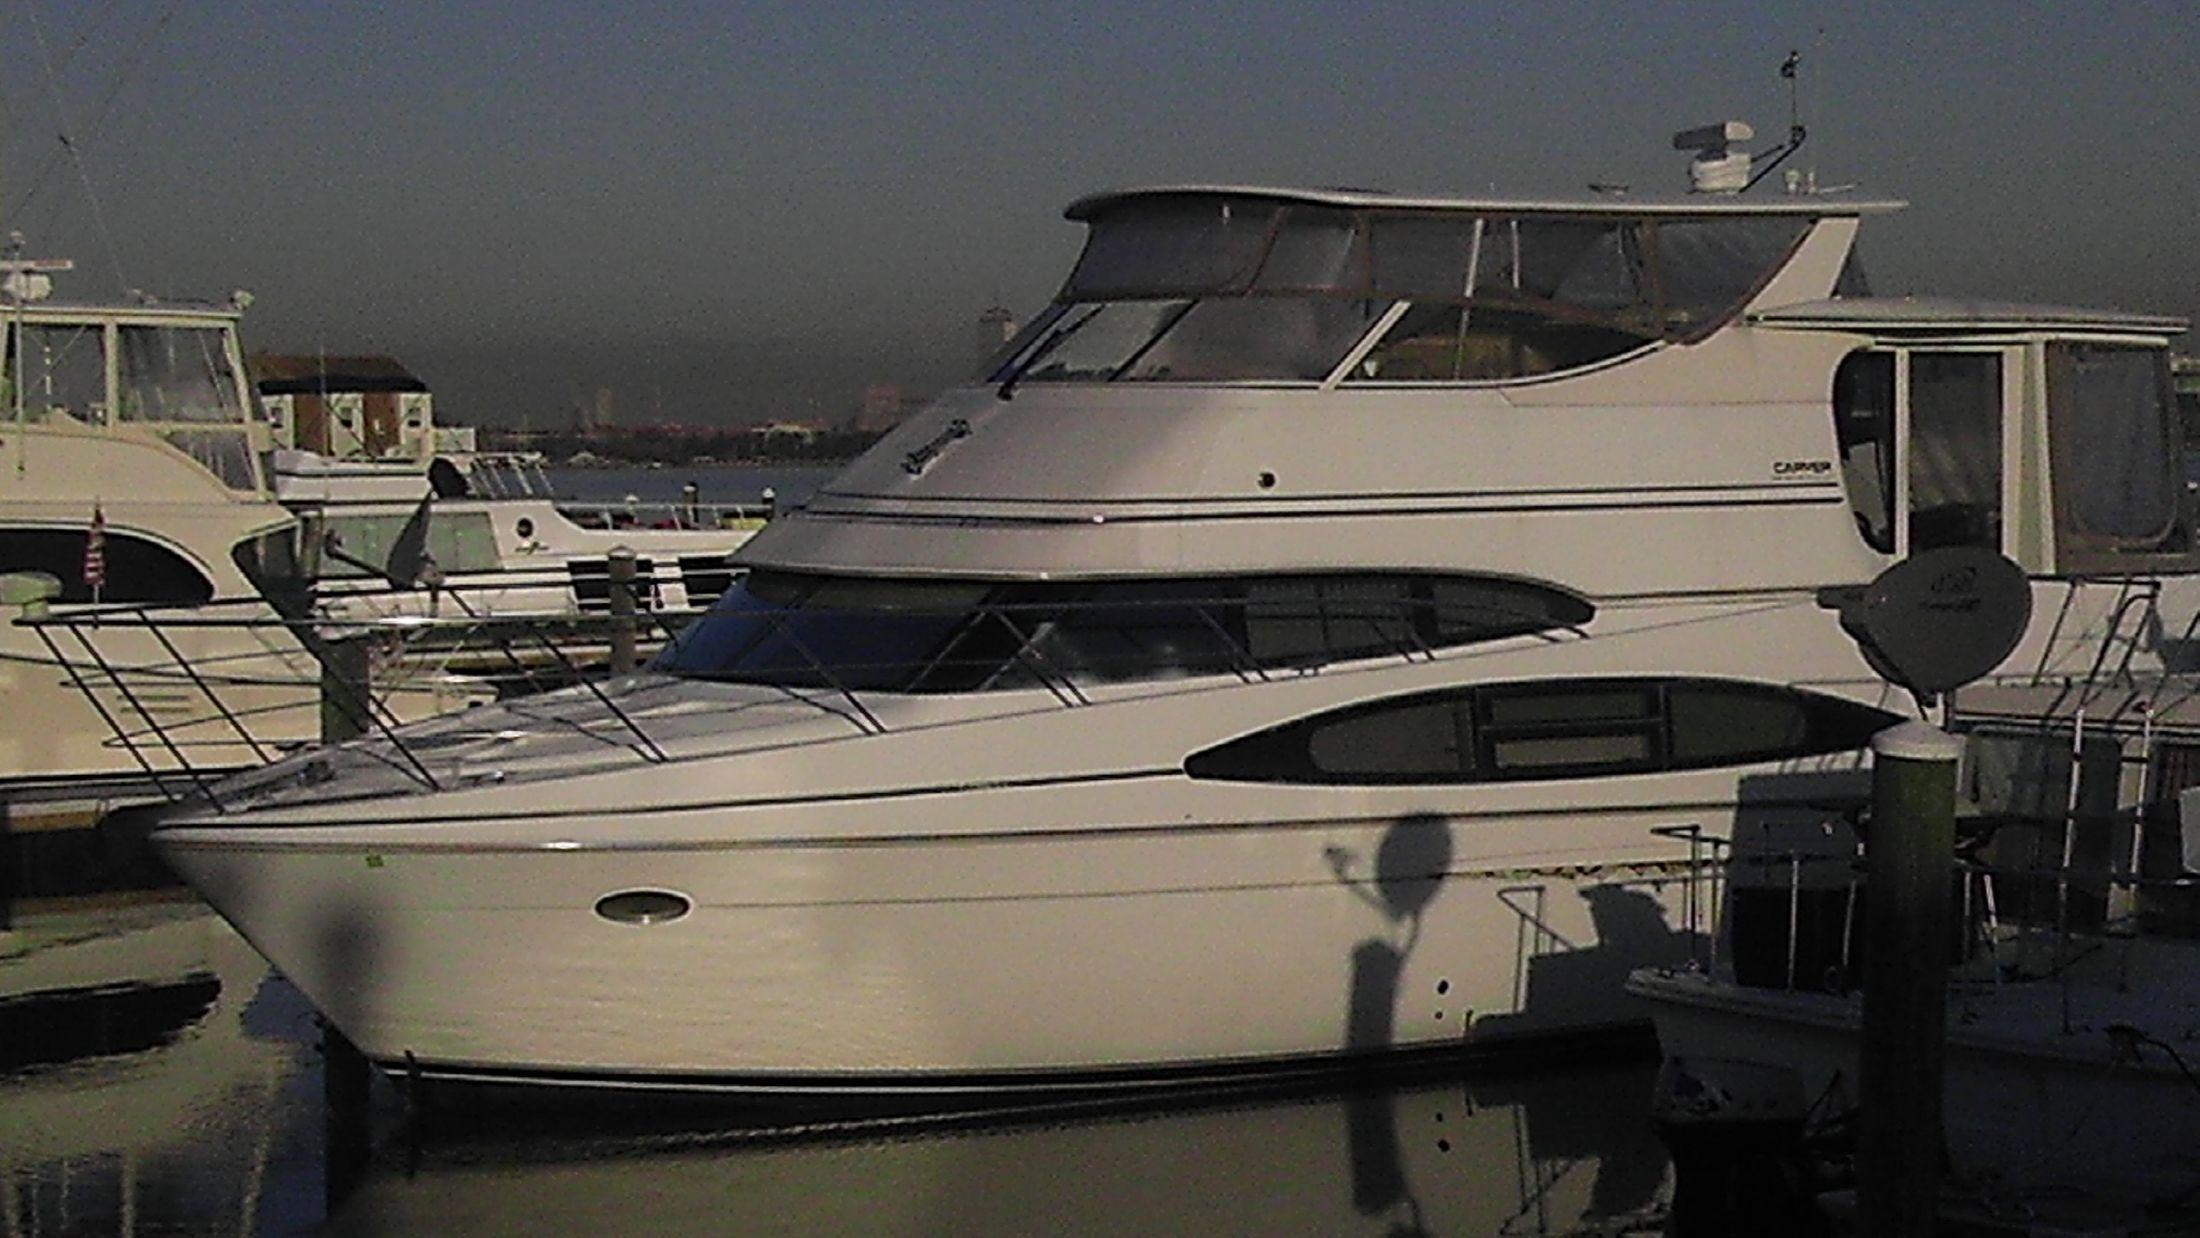 Carver 466 Motor Yacht, Quincy